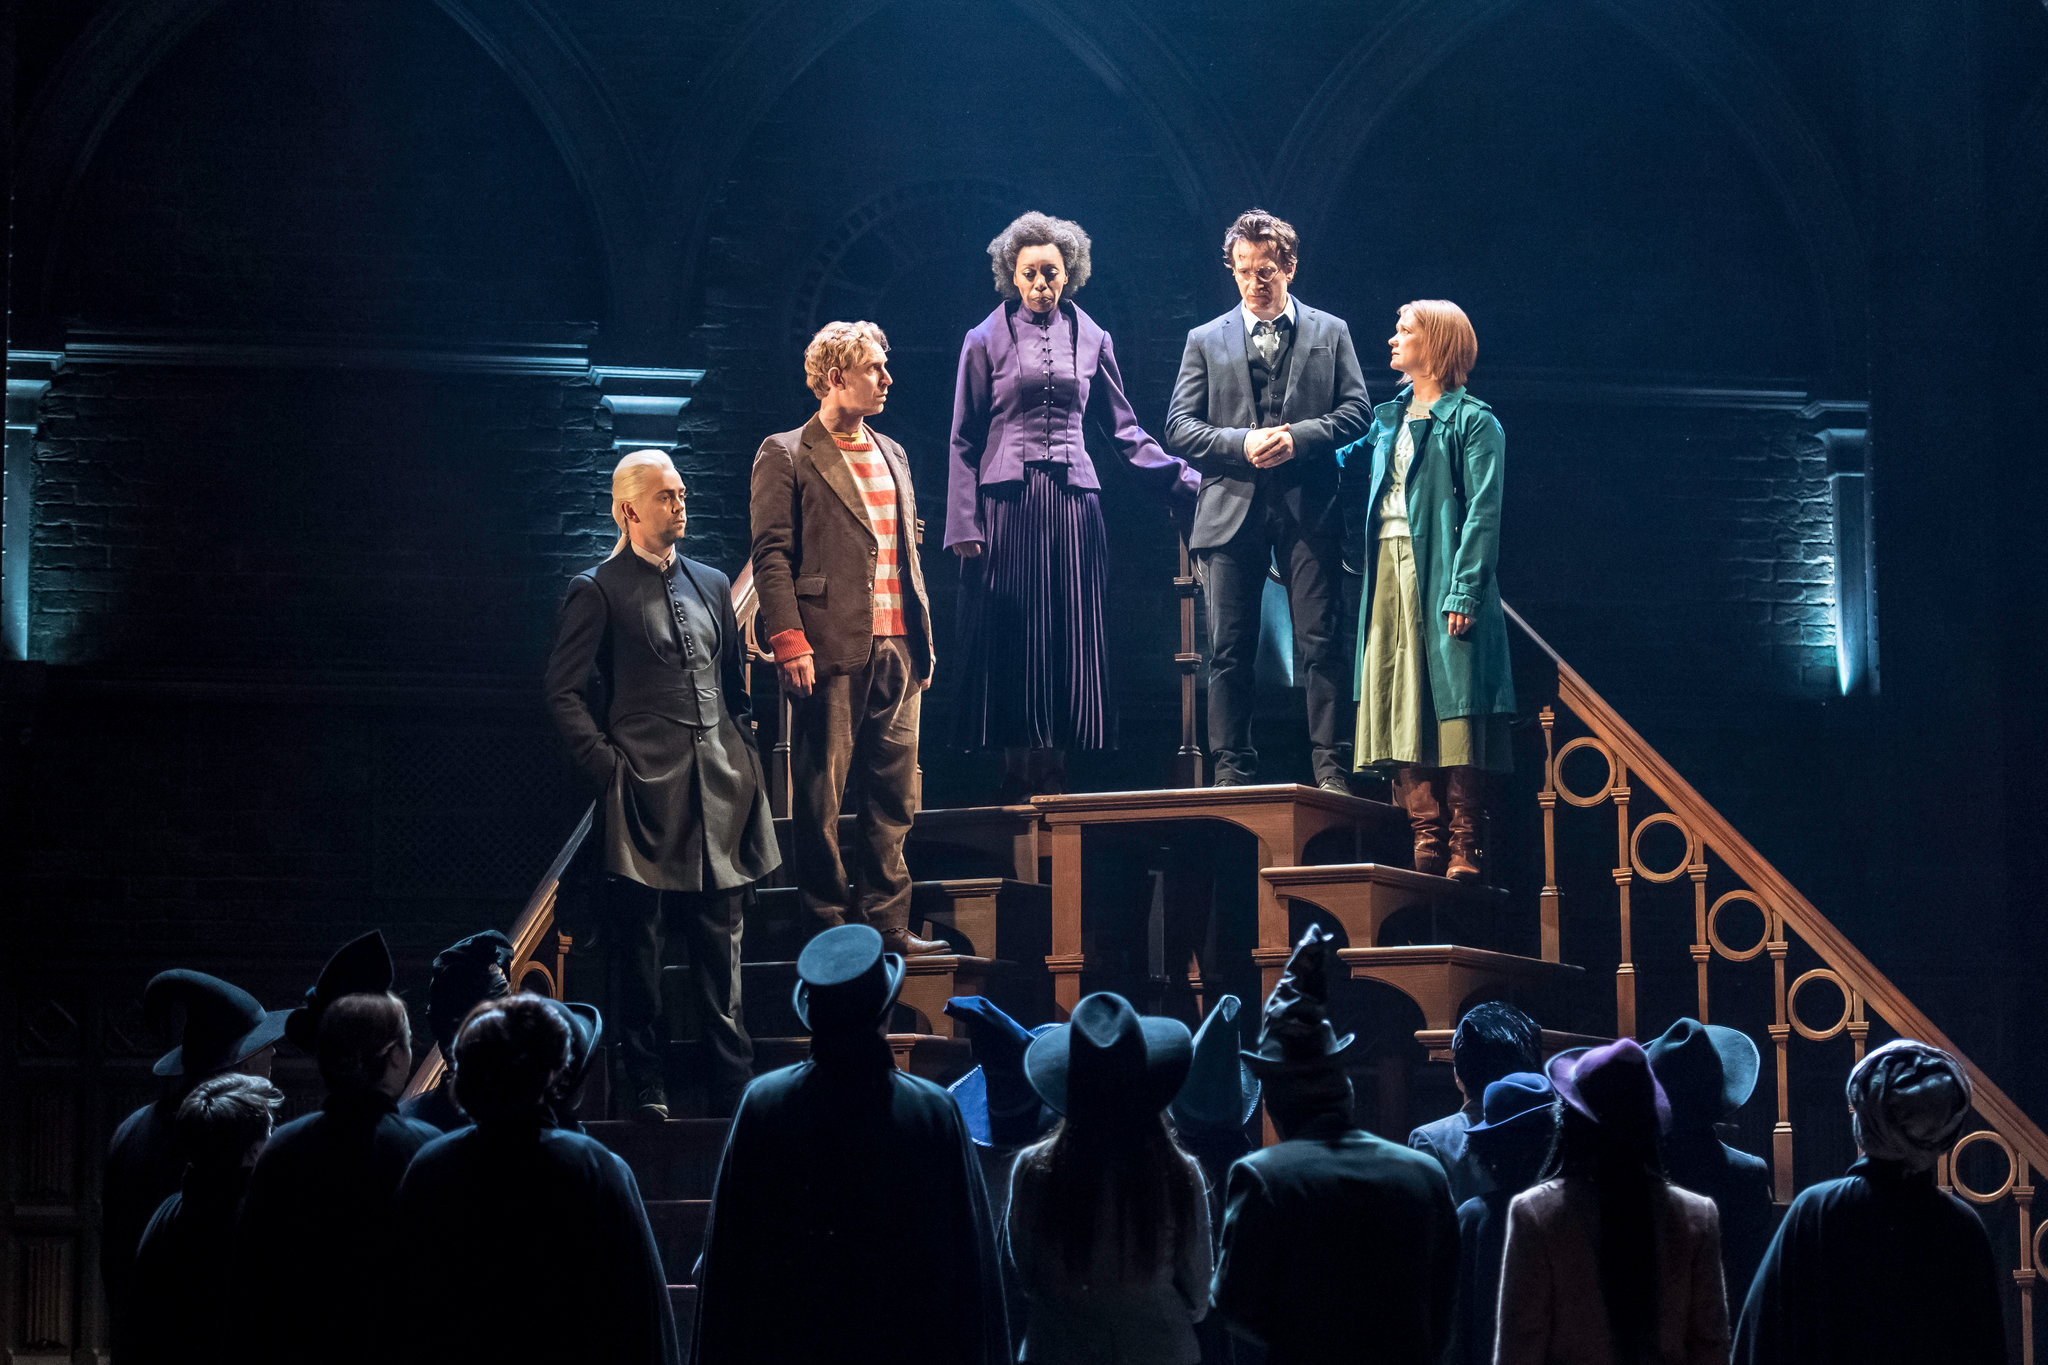 Harry Potter and The Cursed Child - Part 1 & 2 (10/29 7:30PM & 10/30 7:30PM) at Lyric Theatre